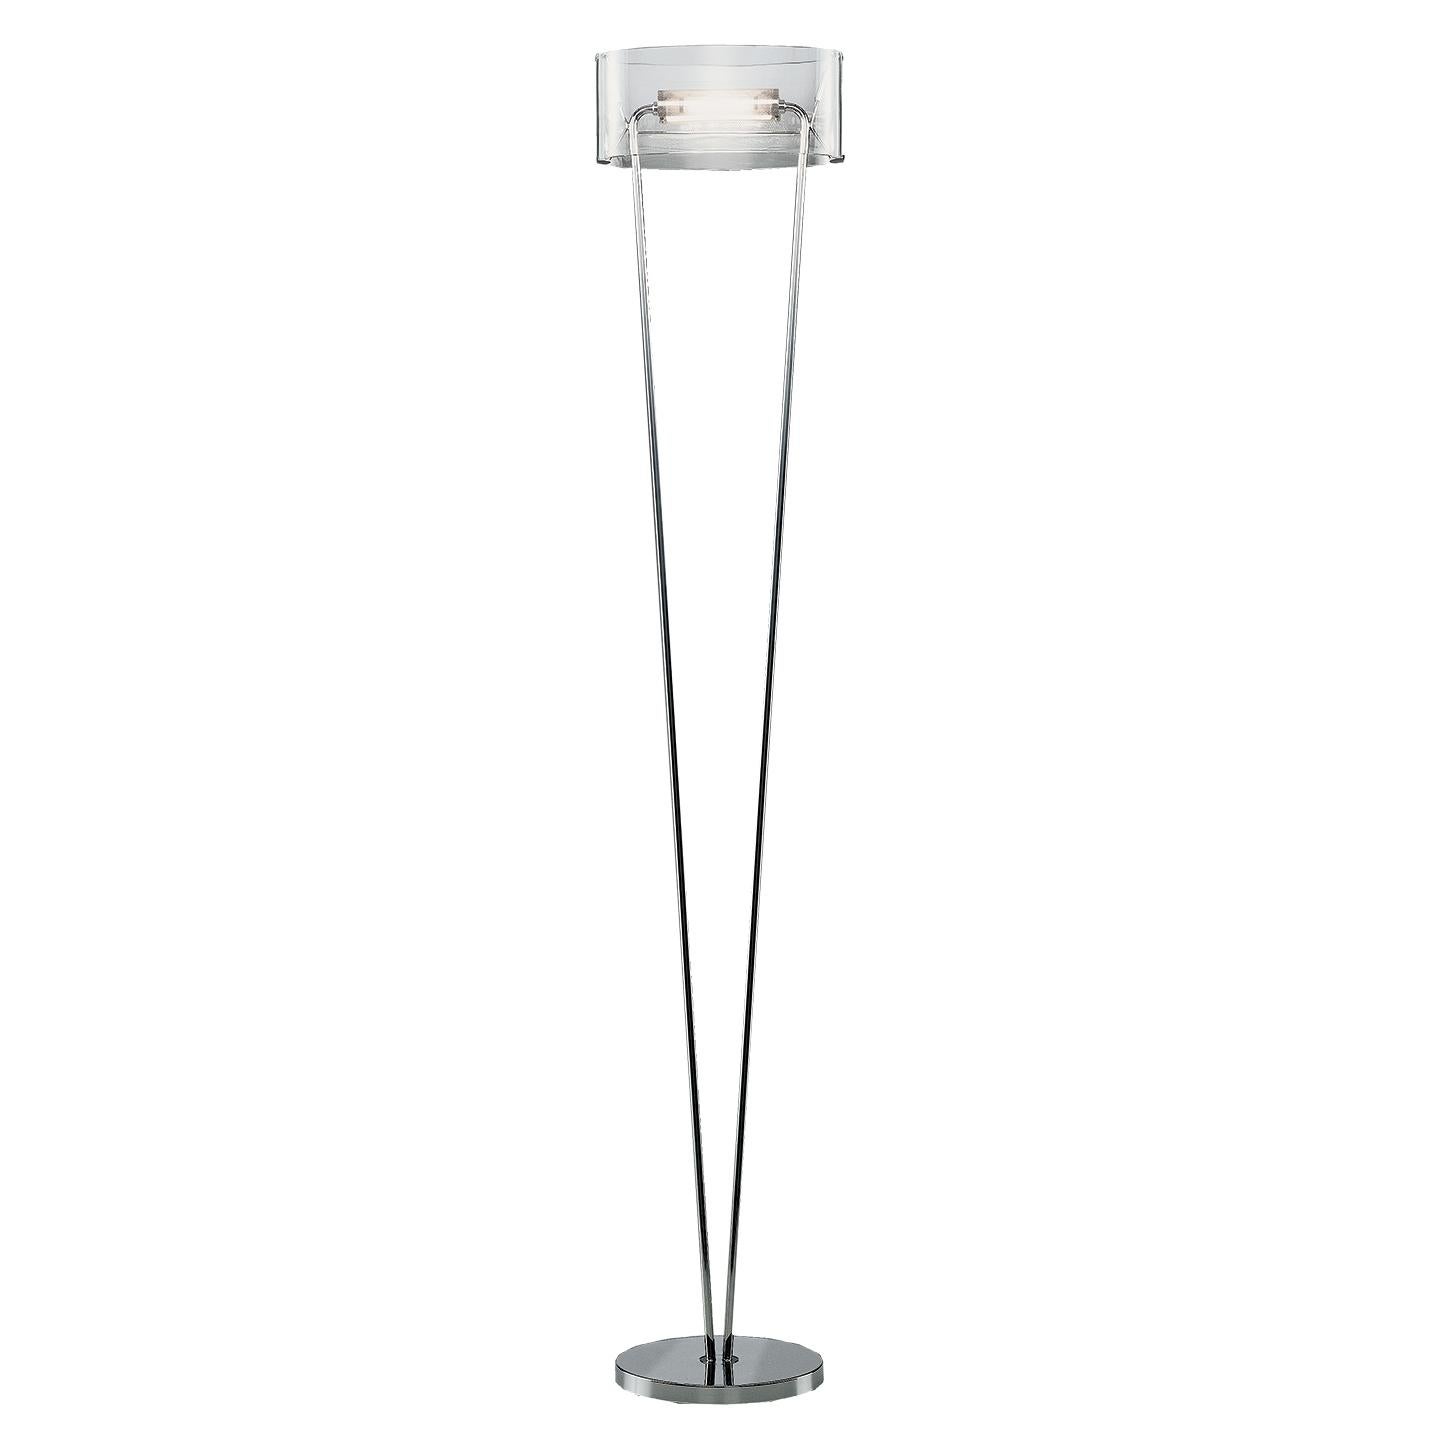 The Vittoria floor lamp is an icon of Leucos design and brings a piece of history into your home or office. Vittoria was designed in 1992 by Toso, Massari & Associates and has become an inspiration for creating multiple light source options from the